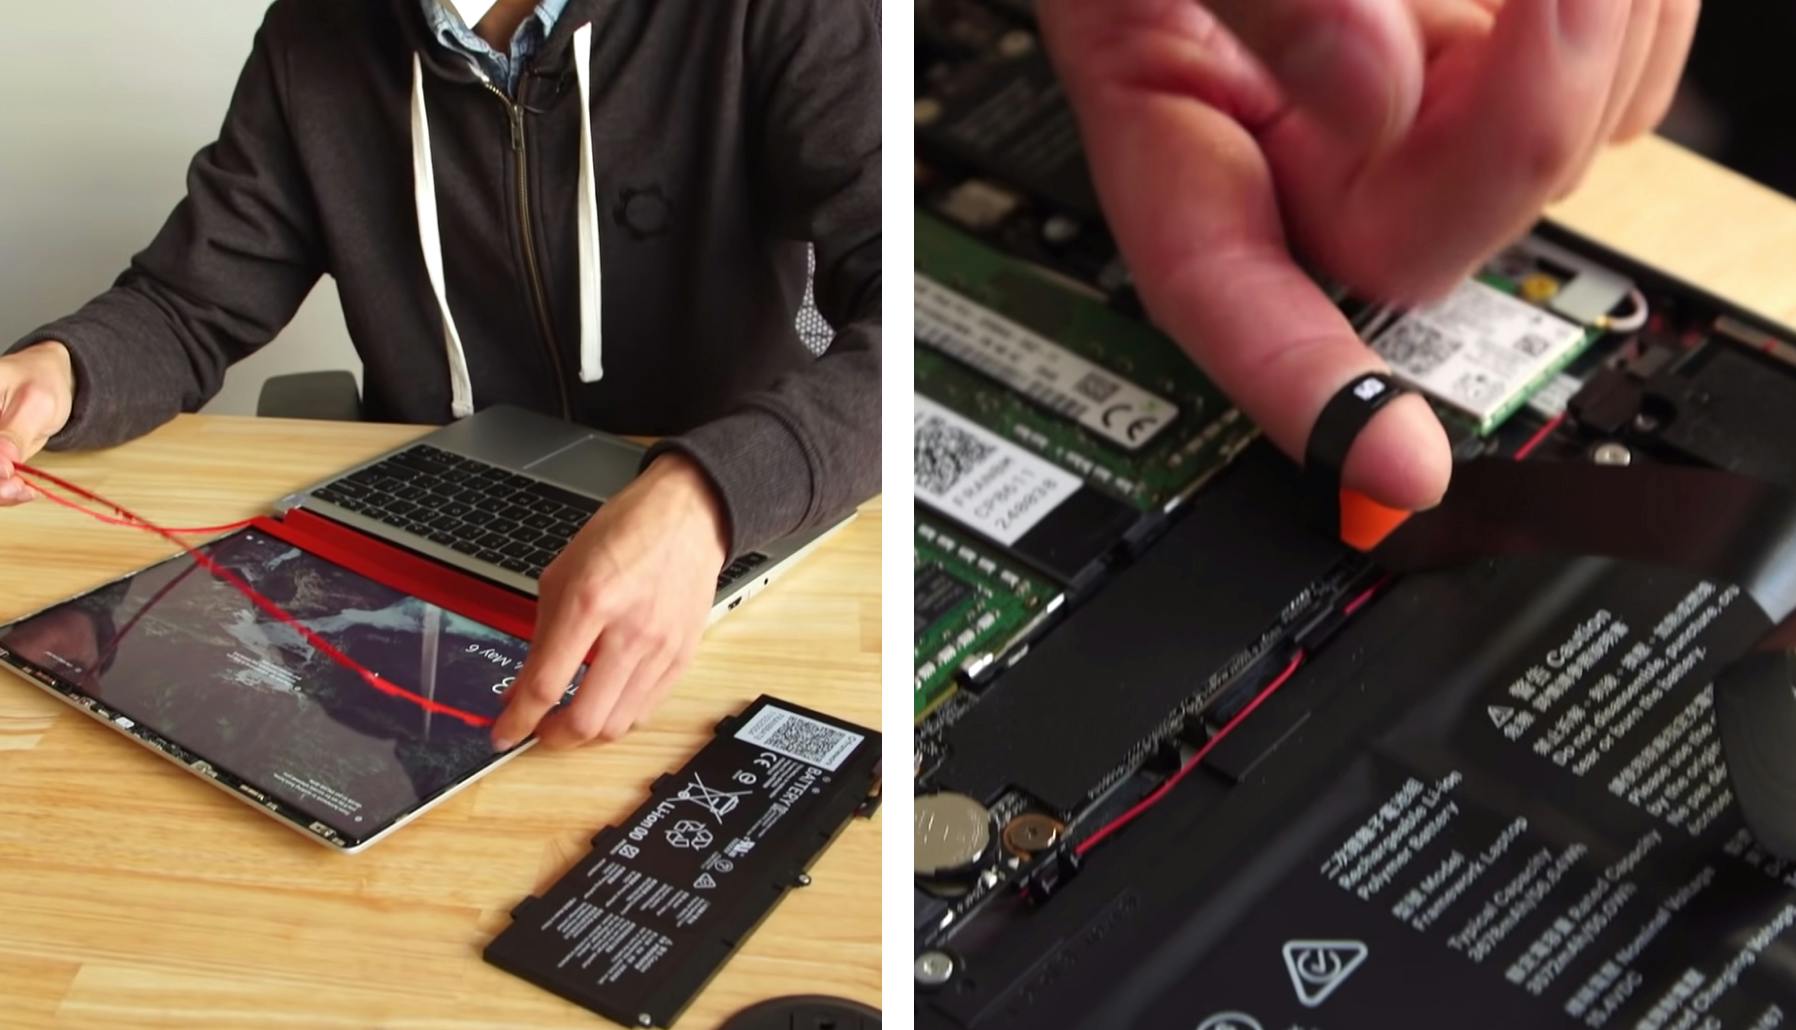 Left image shows a person removing a bezel from a Framework Laptop. Right image shows a person pulling off a ribbon from the Framework Laptop.